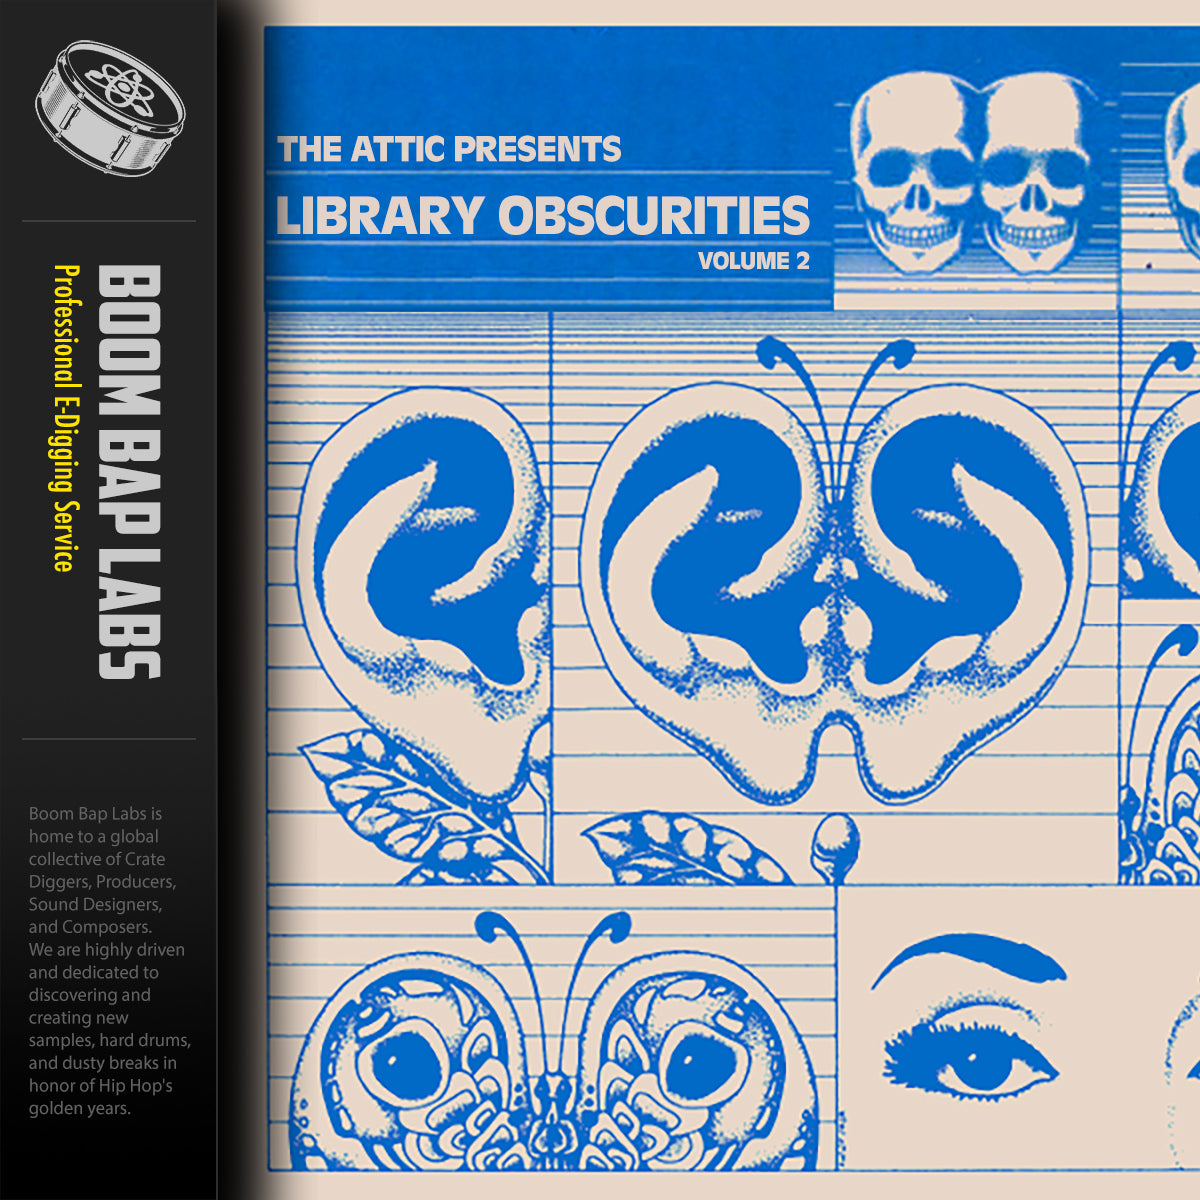 Library Obscurities Vol 2